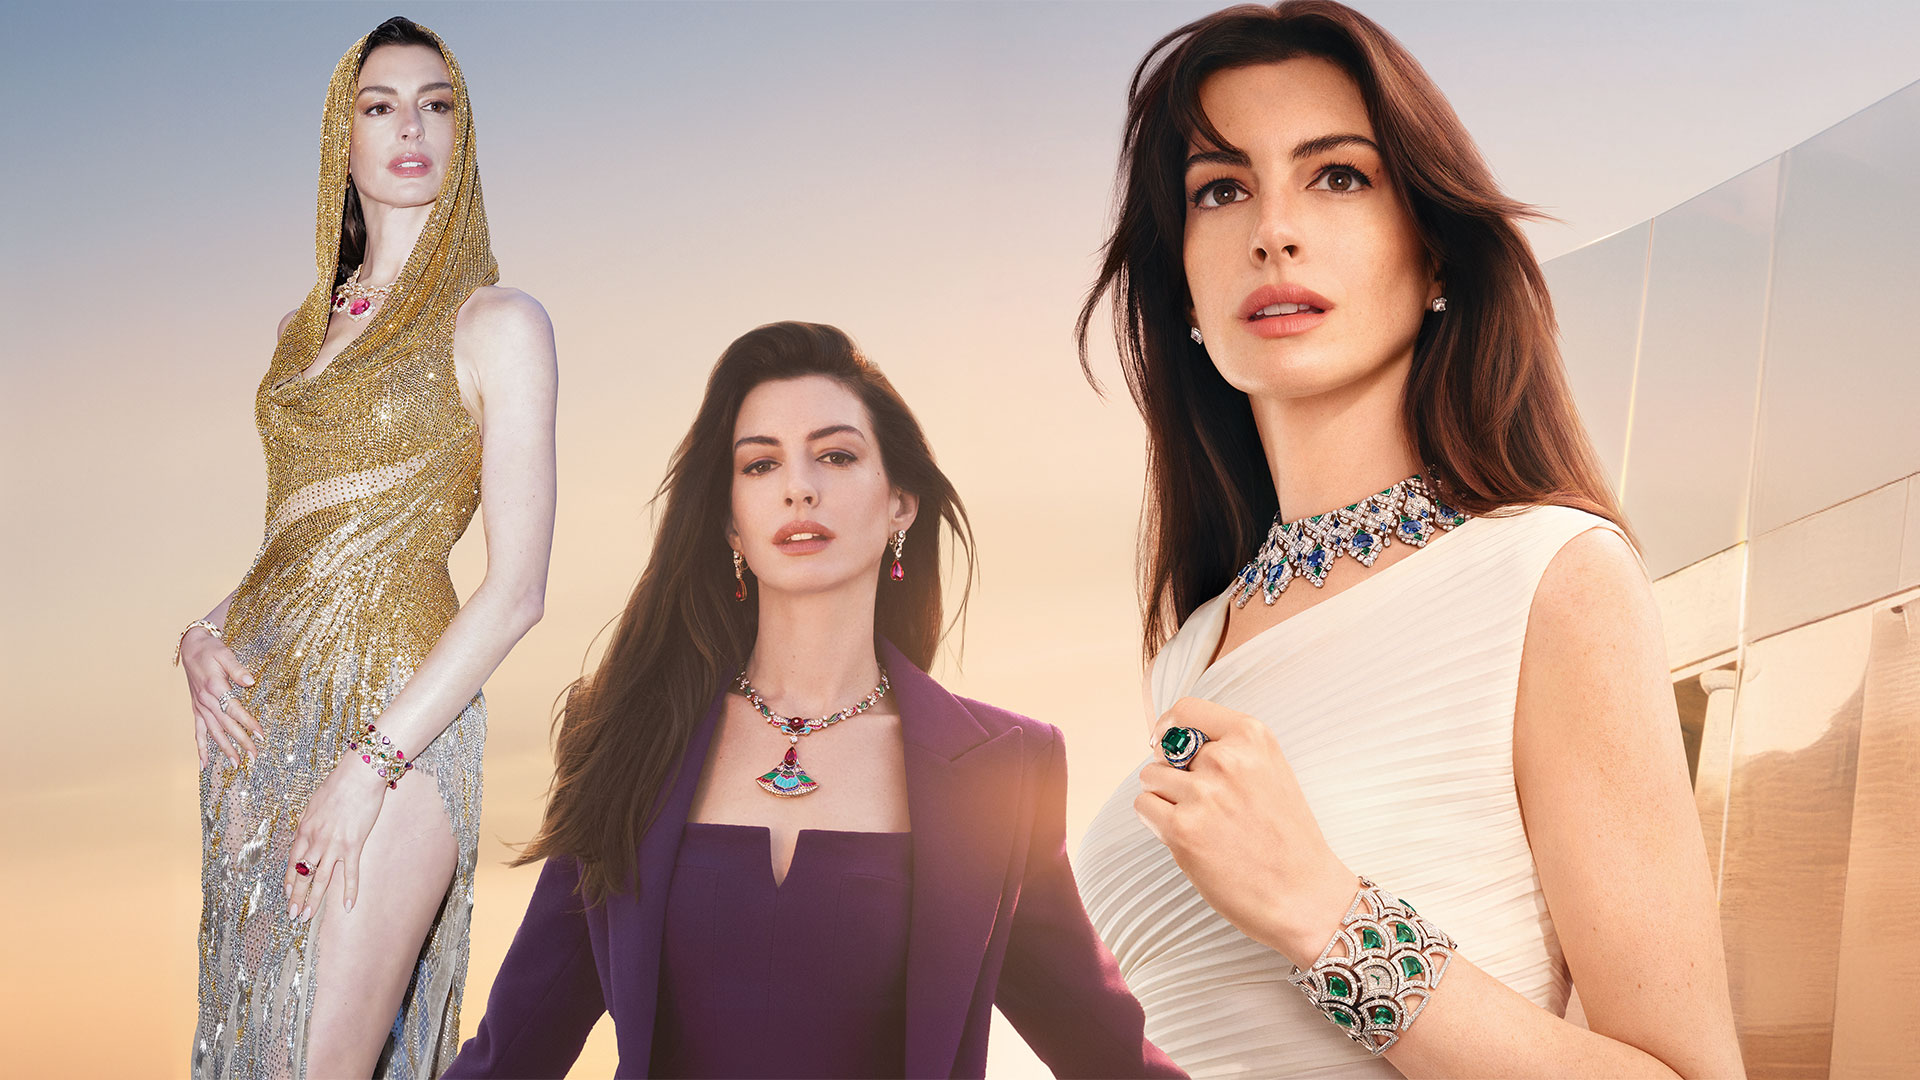 Ways of Hathaway: America’s sweetheart Anne Hathaway has journeyed from girl next door to empowering woman of the world